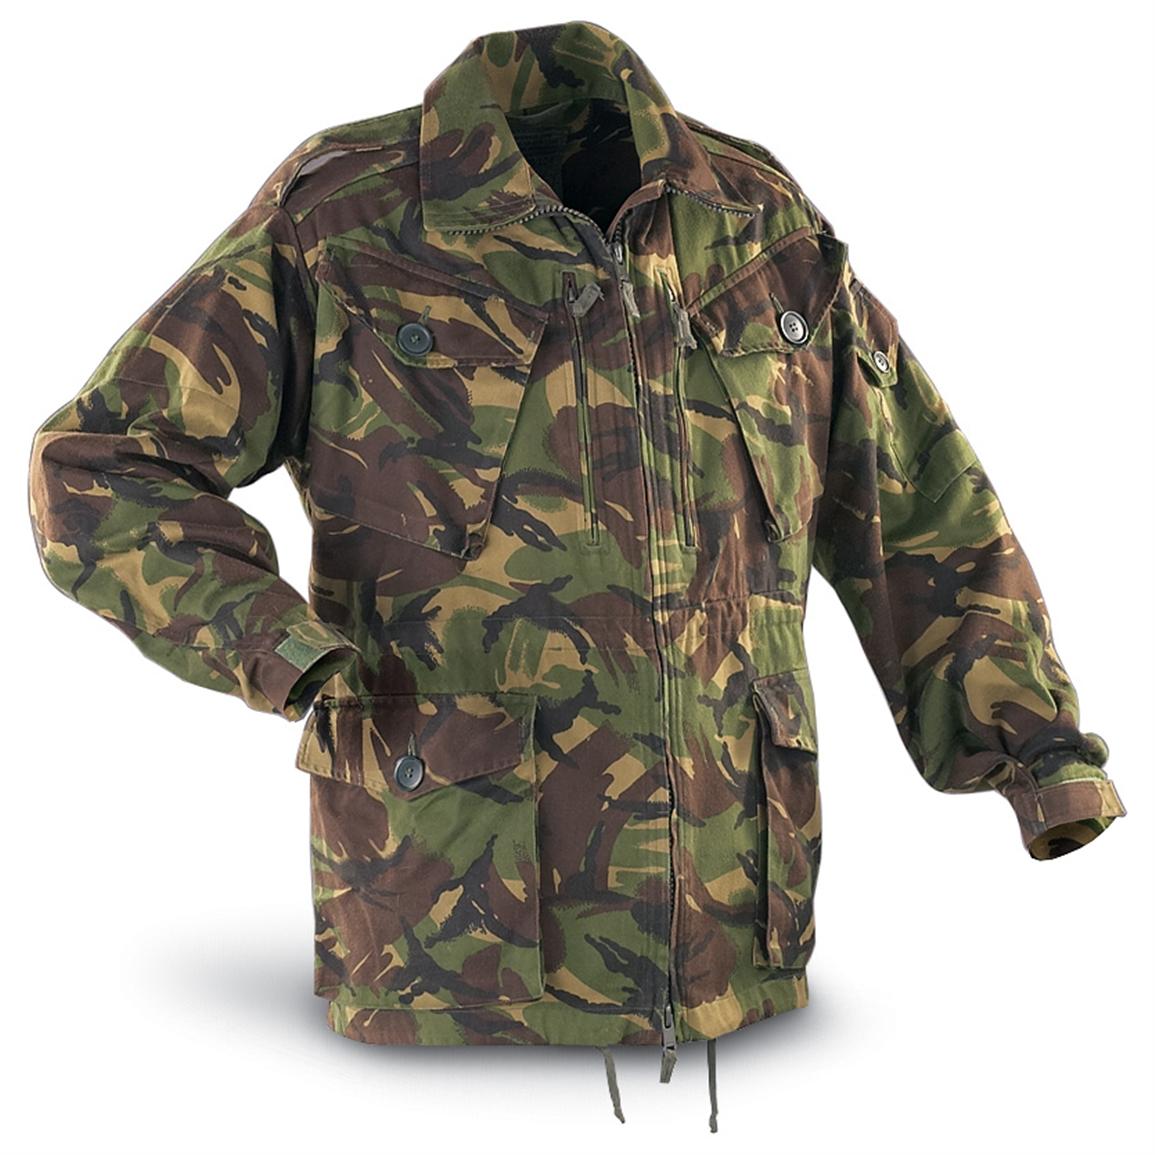 Used British Temperate 94 Jacket, DPM Camo - 95623, at Sportsman's Guide